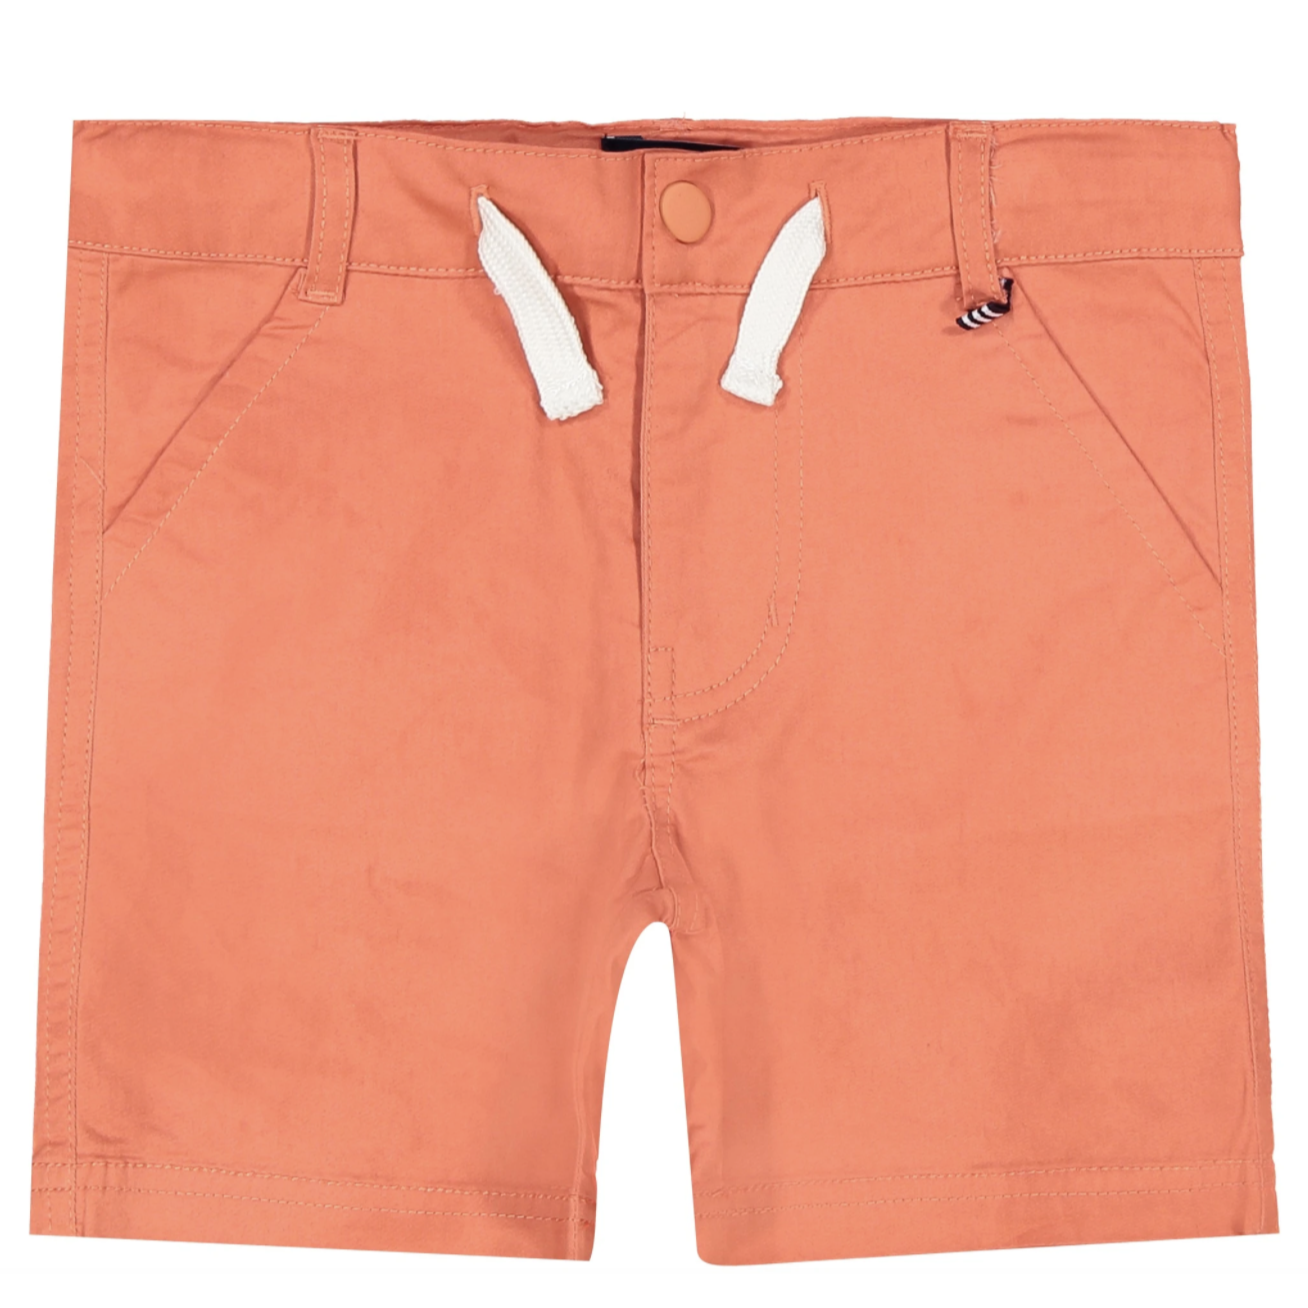 Andy & Evan Boys Twill Shorts - Coral-ANDY & EVAN-Little Giant Kidz